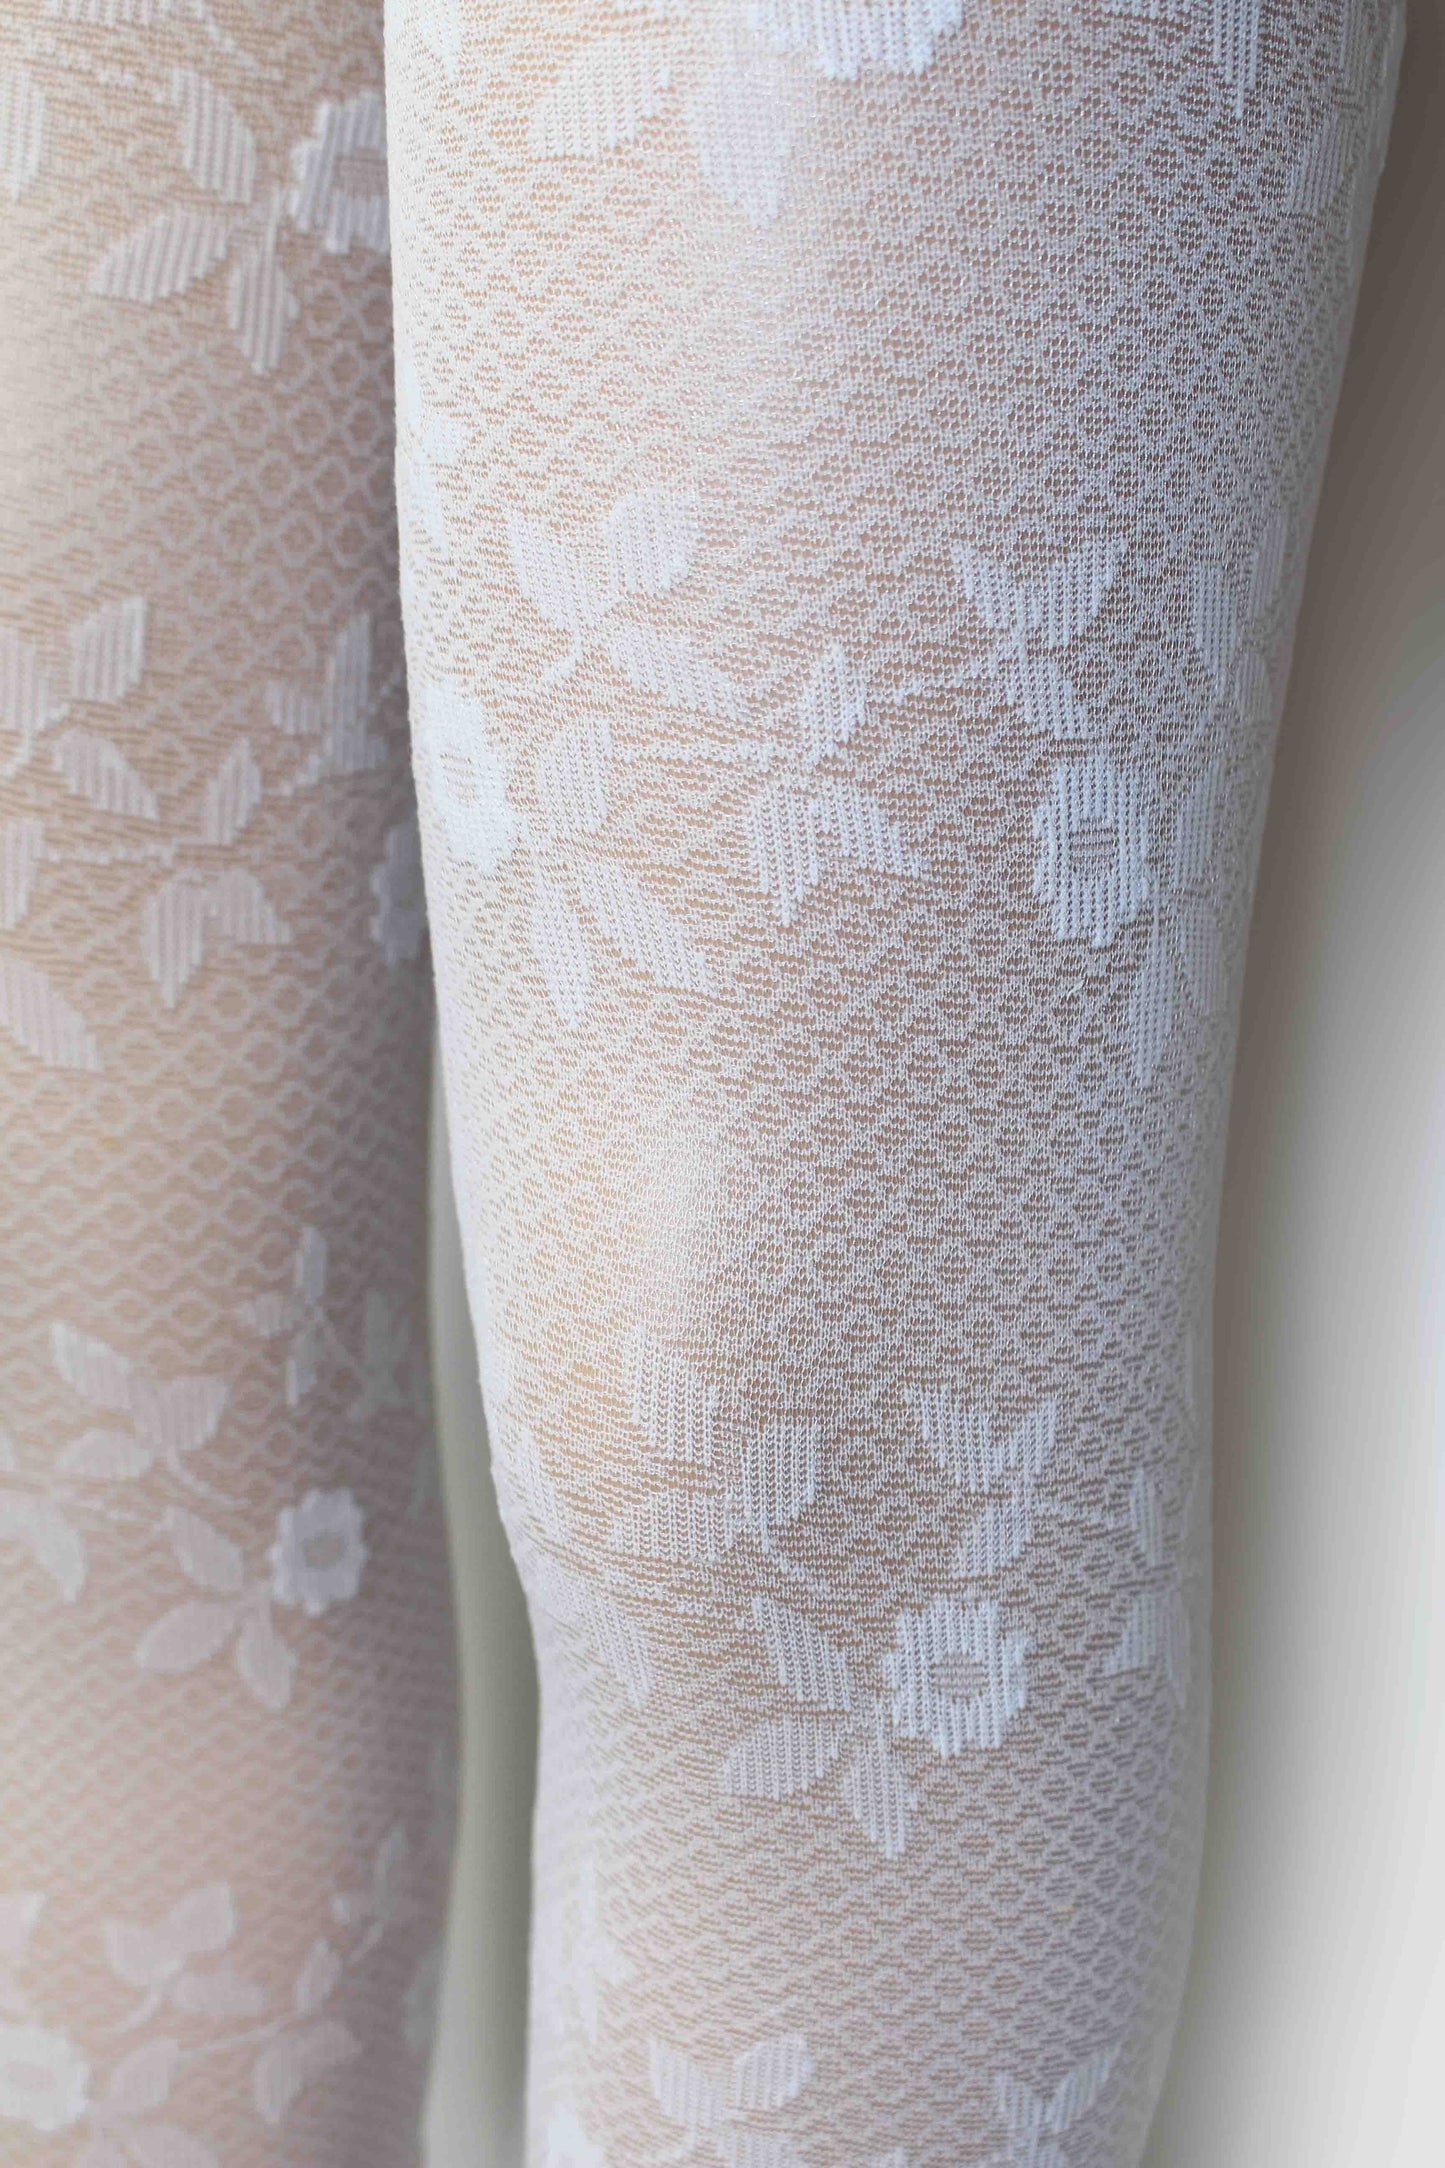 Omsa Serenella Lovely Collant - White semi sheer micro diamond patterned children's fashion tights with an all over woven floral design, perfect for flower girls or first holy communion.